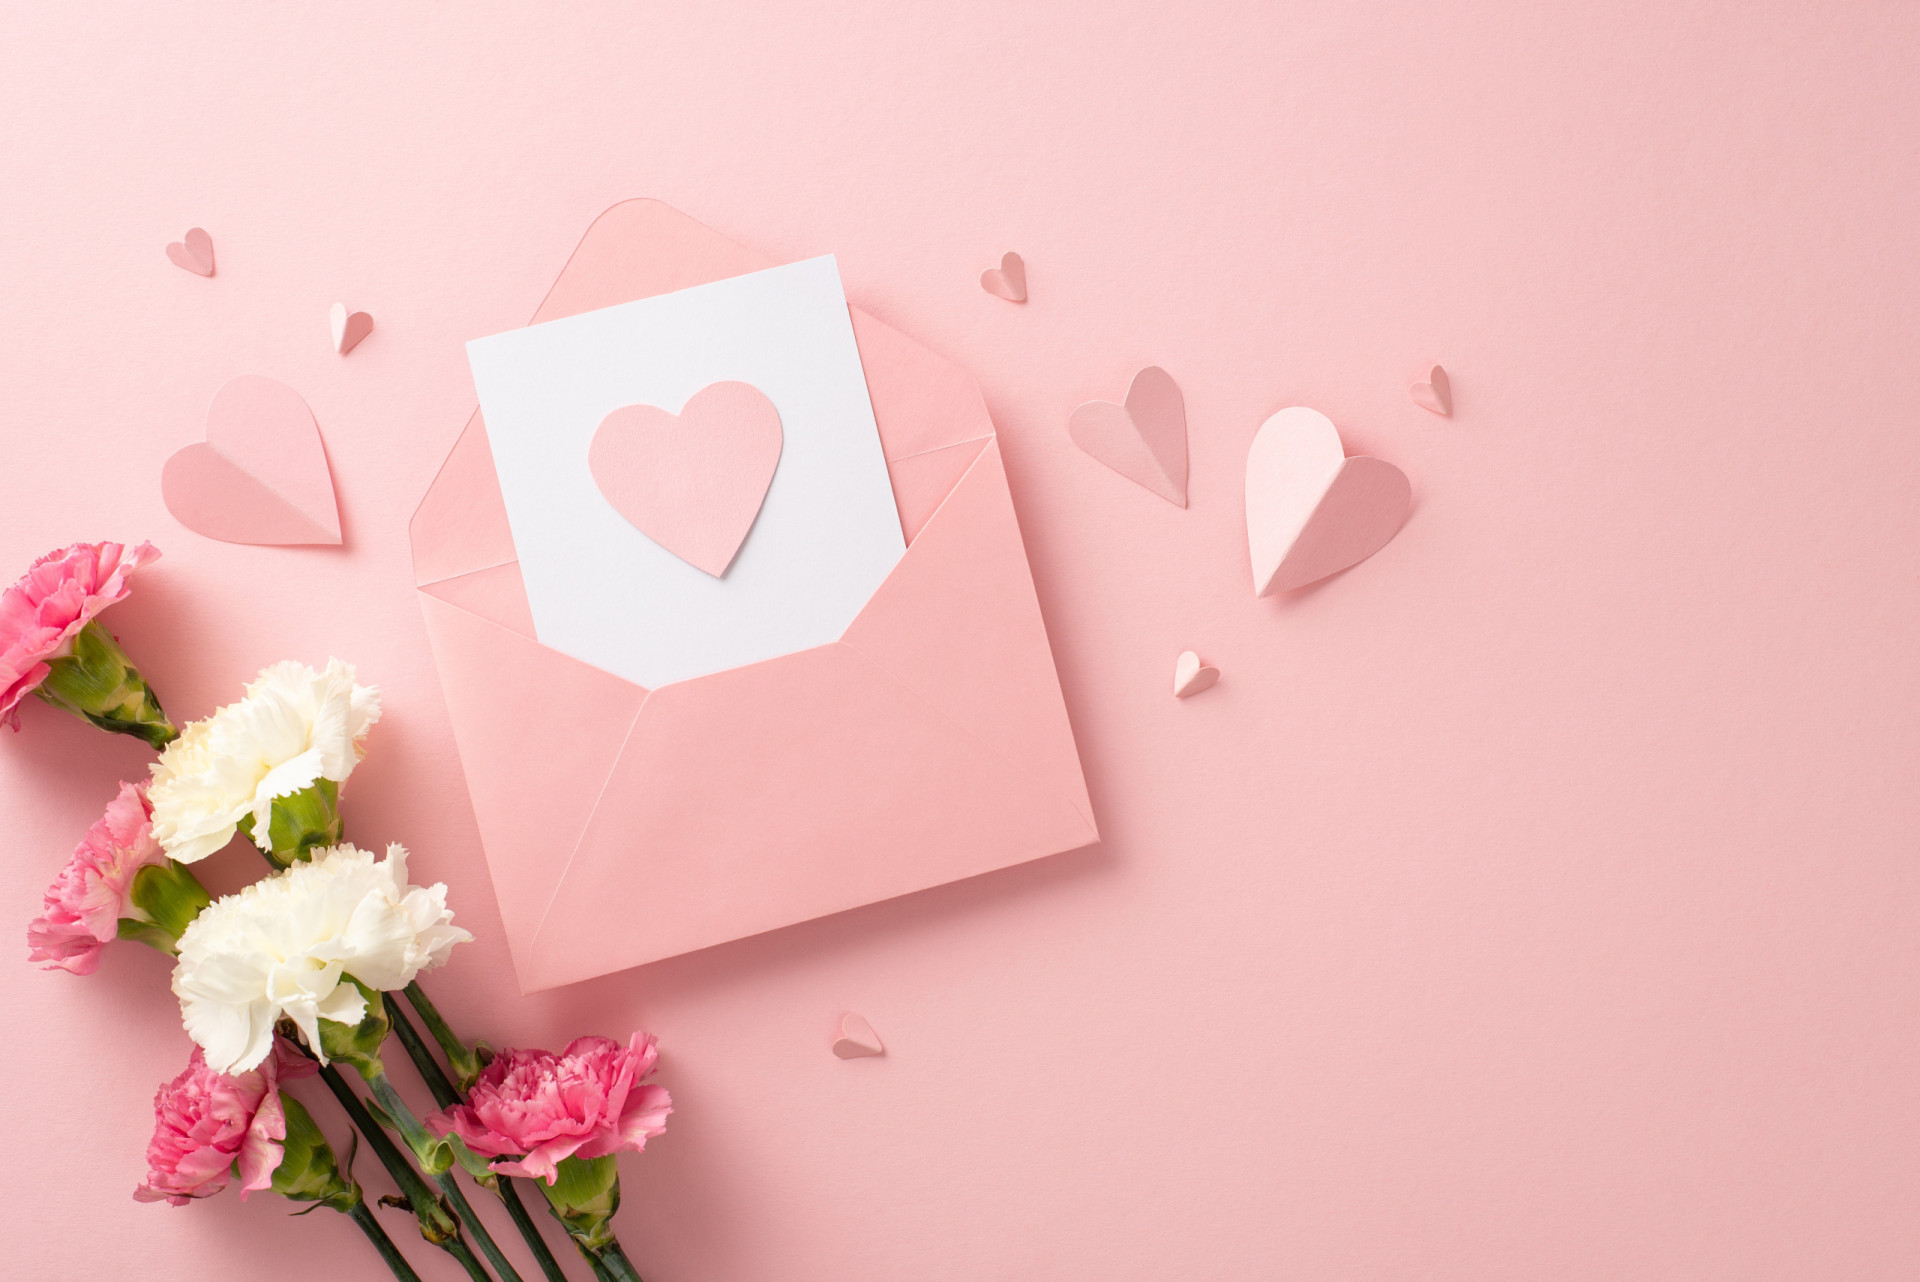 <p>Simple yet impactful, a handwritten thank you note shows mom you care. Mention specific things in this letter that you appreciate about her.</p><p>You may also like:<a href="https://www.starsinsider.com/n/490311?utm_source=msn.com&utm_medium=display&utm_campaign=referral_description&utm_content=708861en-us"> The most painful ways to die (according to science)</a></p>